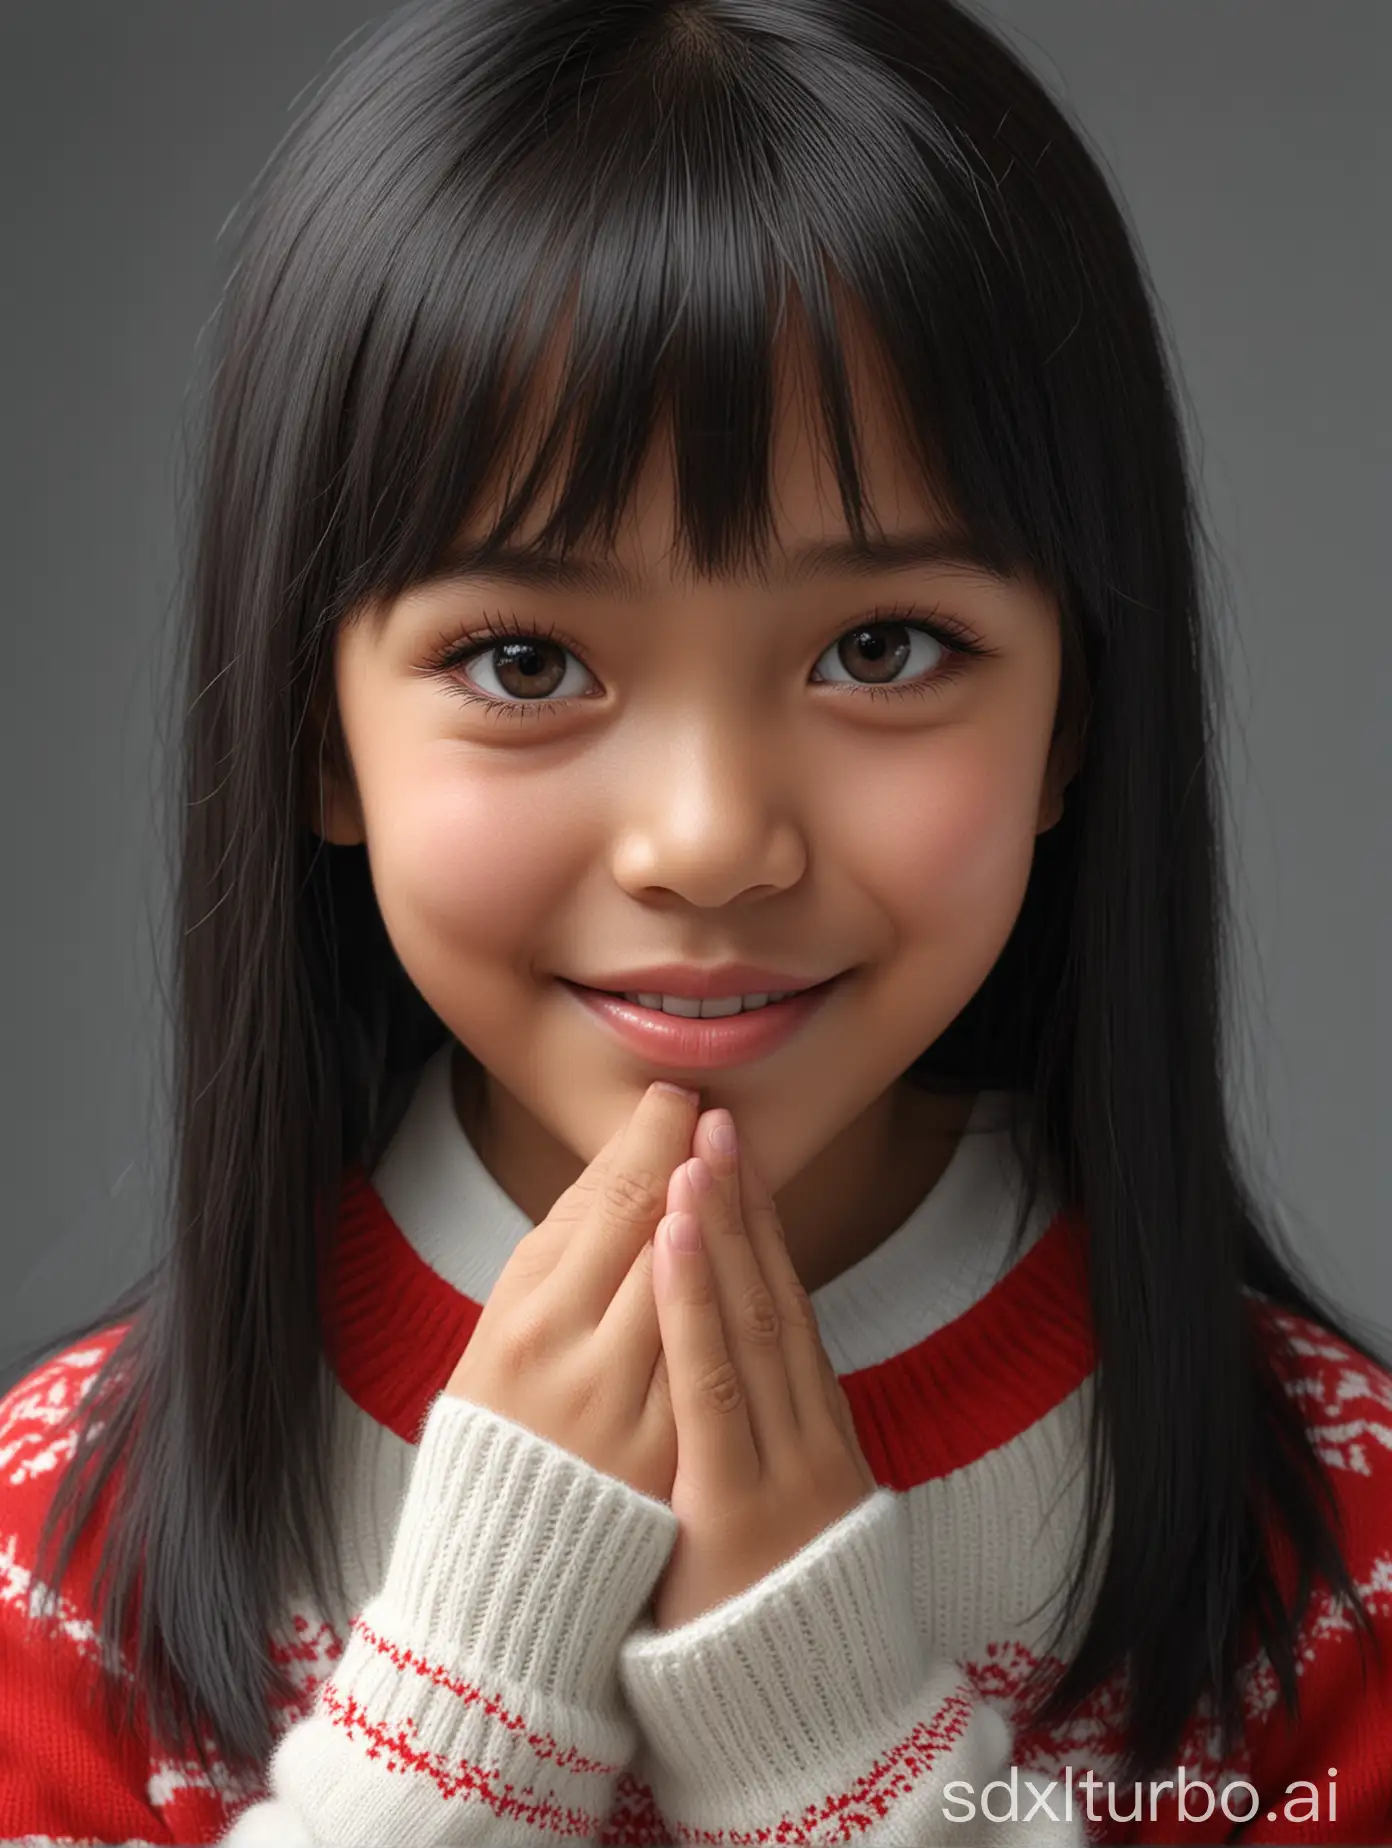 Adorable-Indonesian-Girl-Smiling-in-Red-and-White-Sweater-Portrait